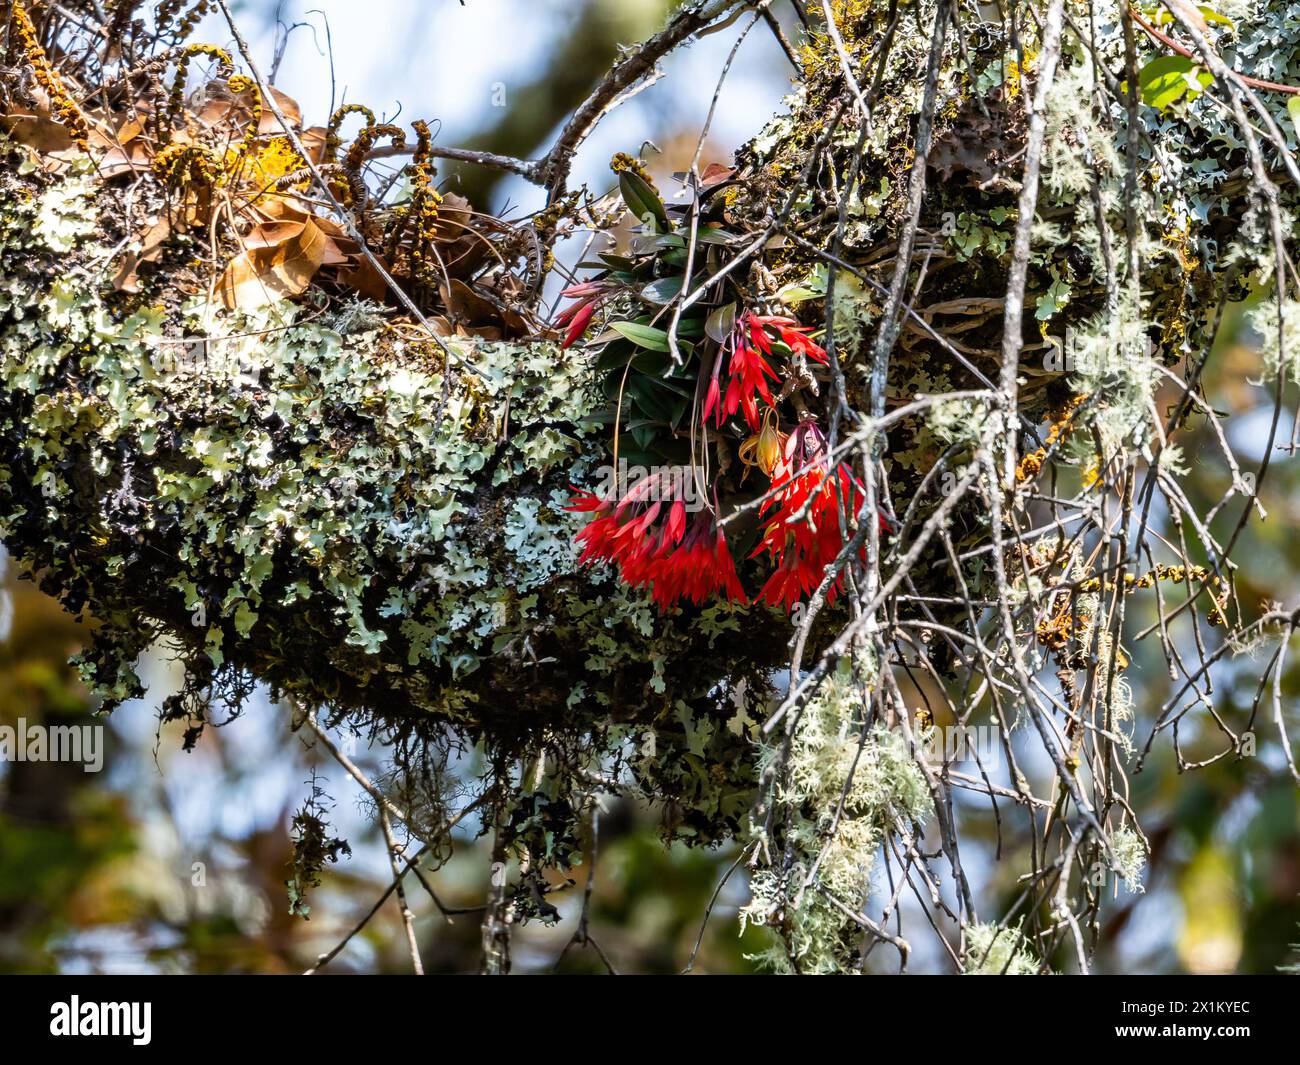 Red flowers of Cattleya orchid (Alamania punicea) on a moss covered tree trunk. Oaxaca, Mexico. Stock Photo